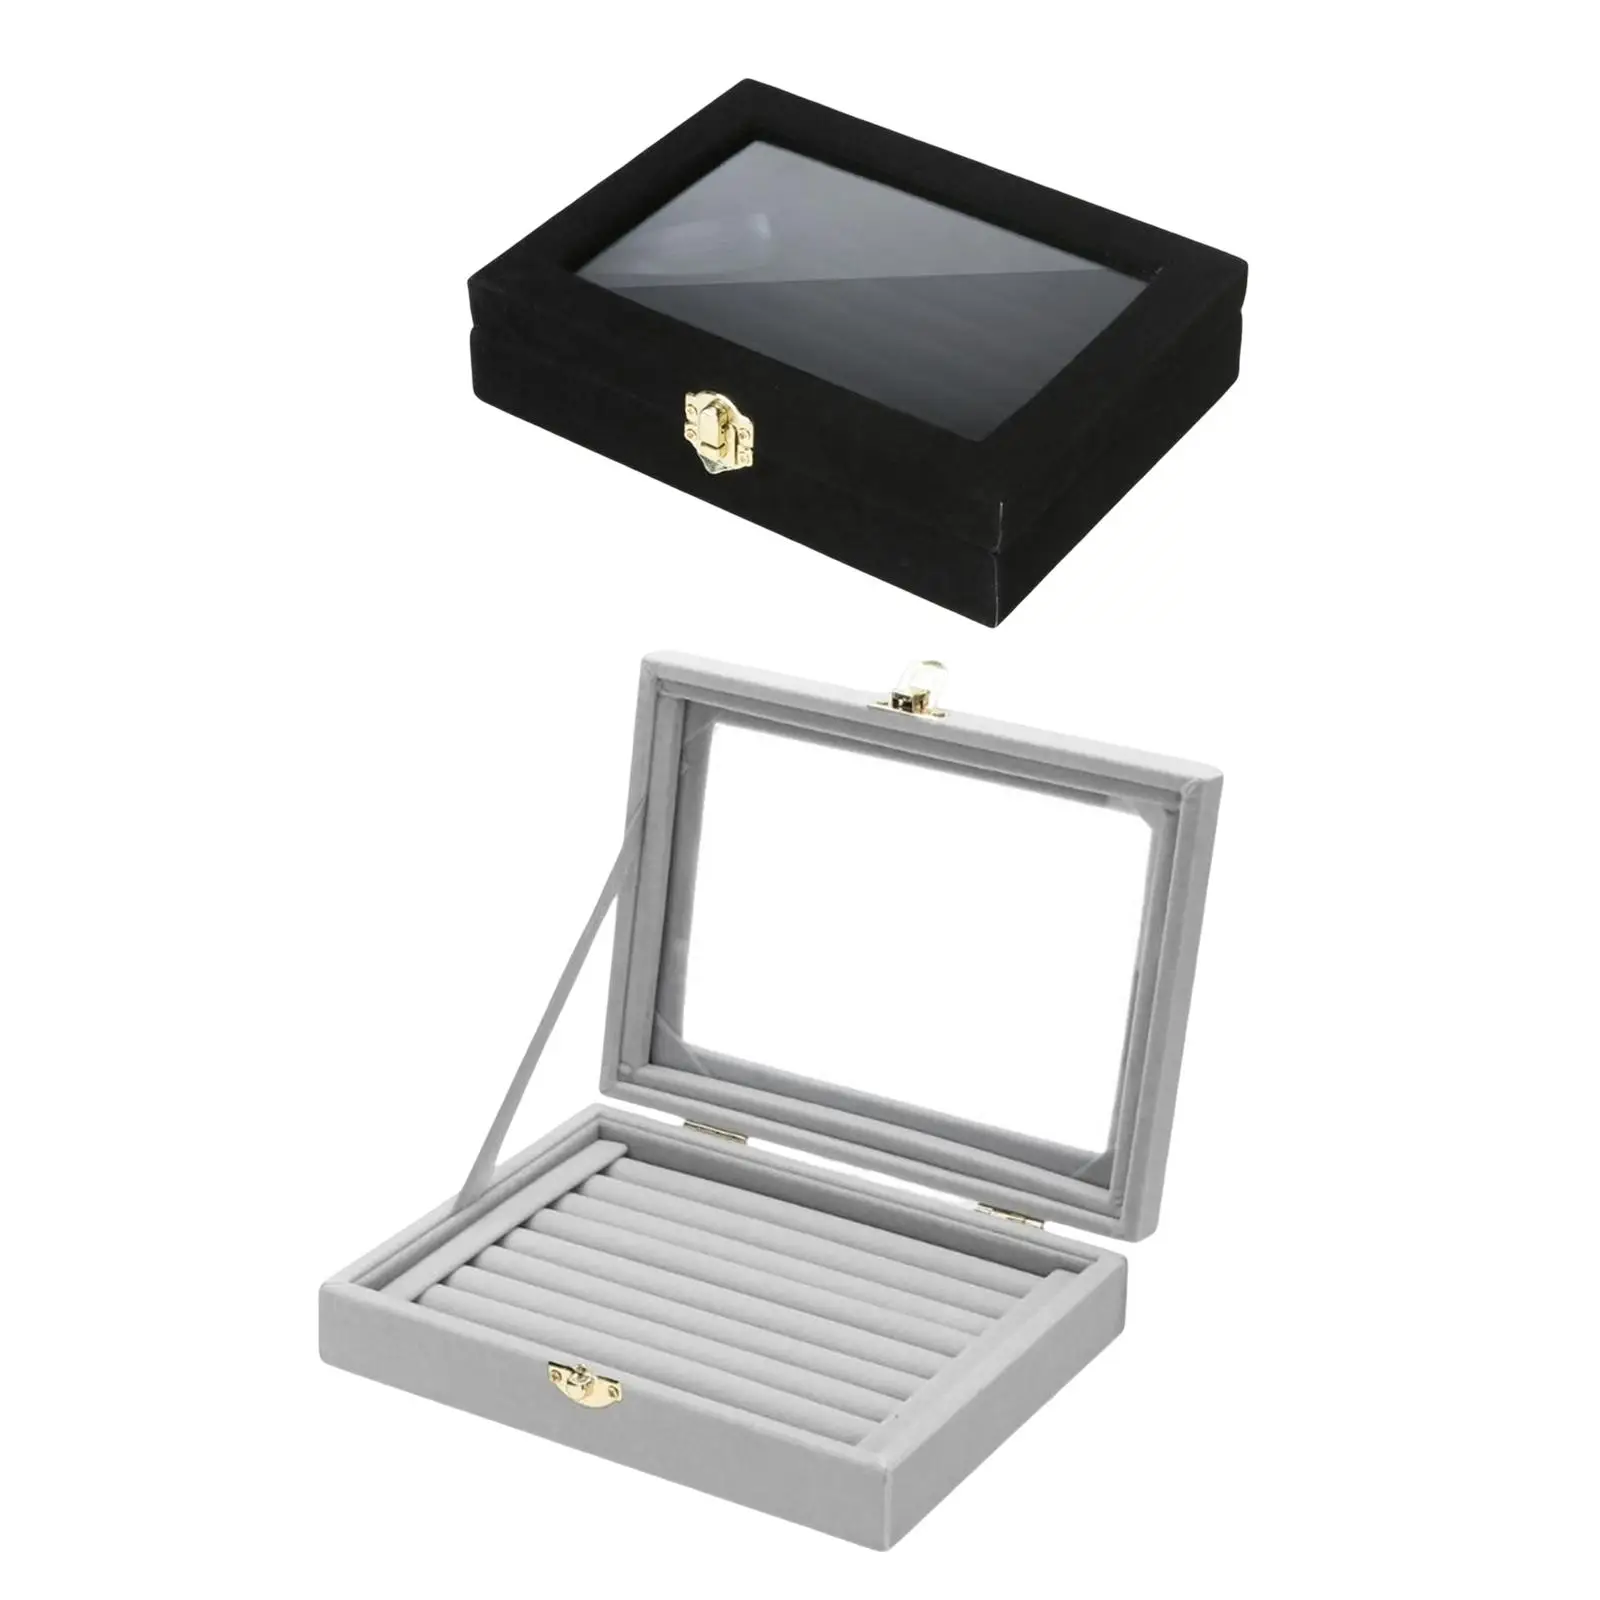 Rings Display Tray Case Gifts Portable Earring Holder for Dresser Counter Jewelry Show Showroom for Rings Studs Earrings